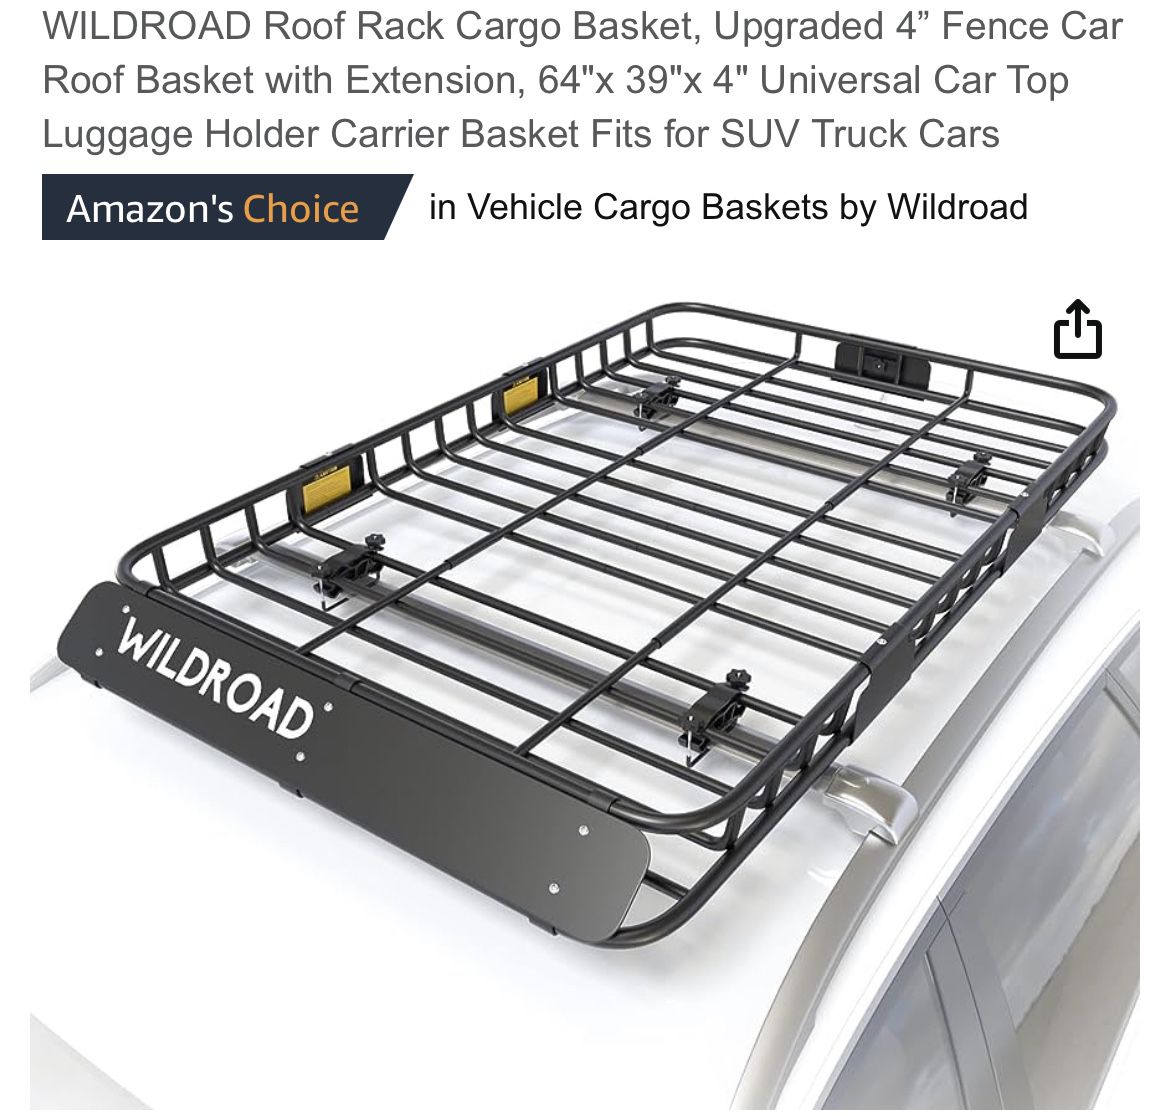  WILDROAD Roof Rack Cargo Basket, Upgraded 4” Fence Car Roof  Basket, 43x 39x 4 Universal Car Top Luggage Holder Carrier Basket Fits  for SUV Truck Cars : Automotive